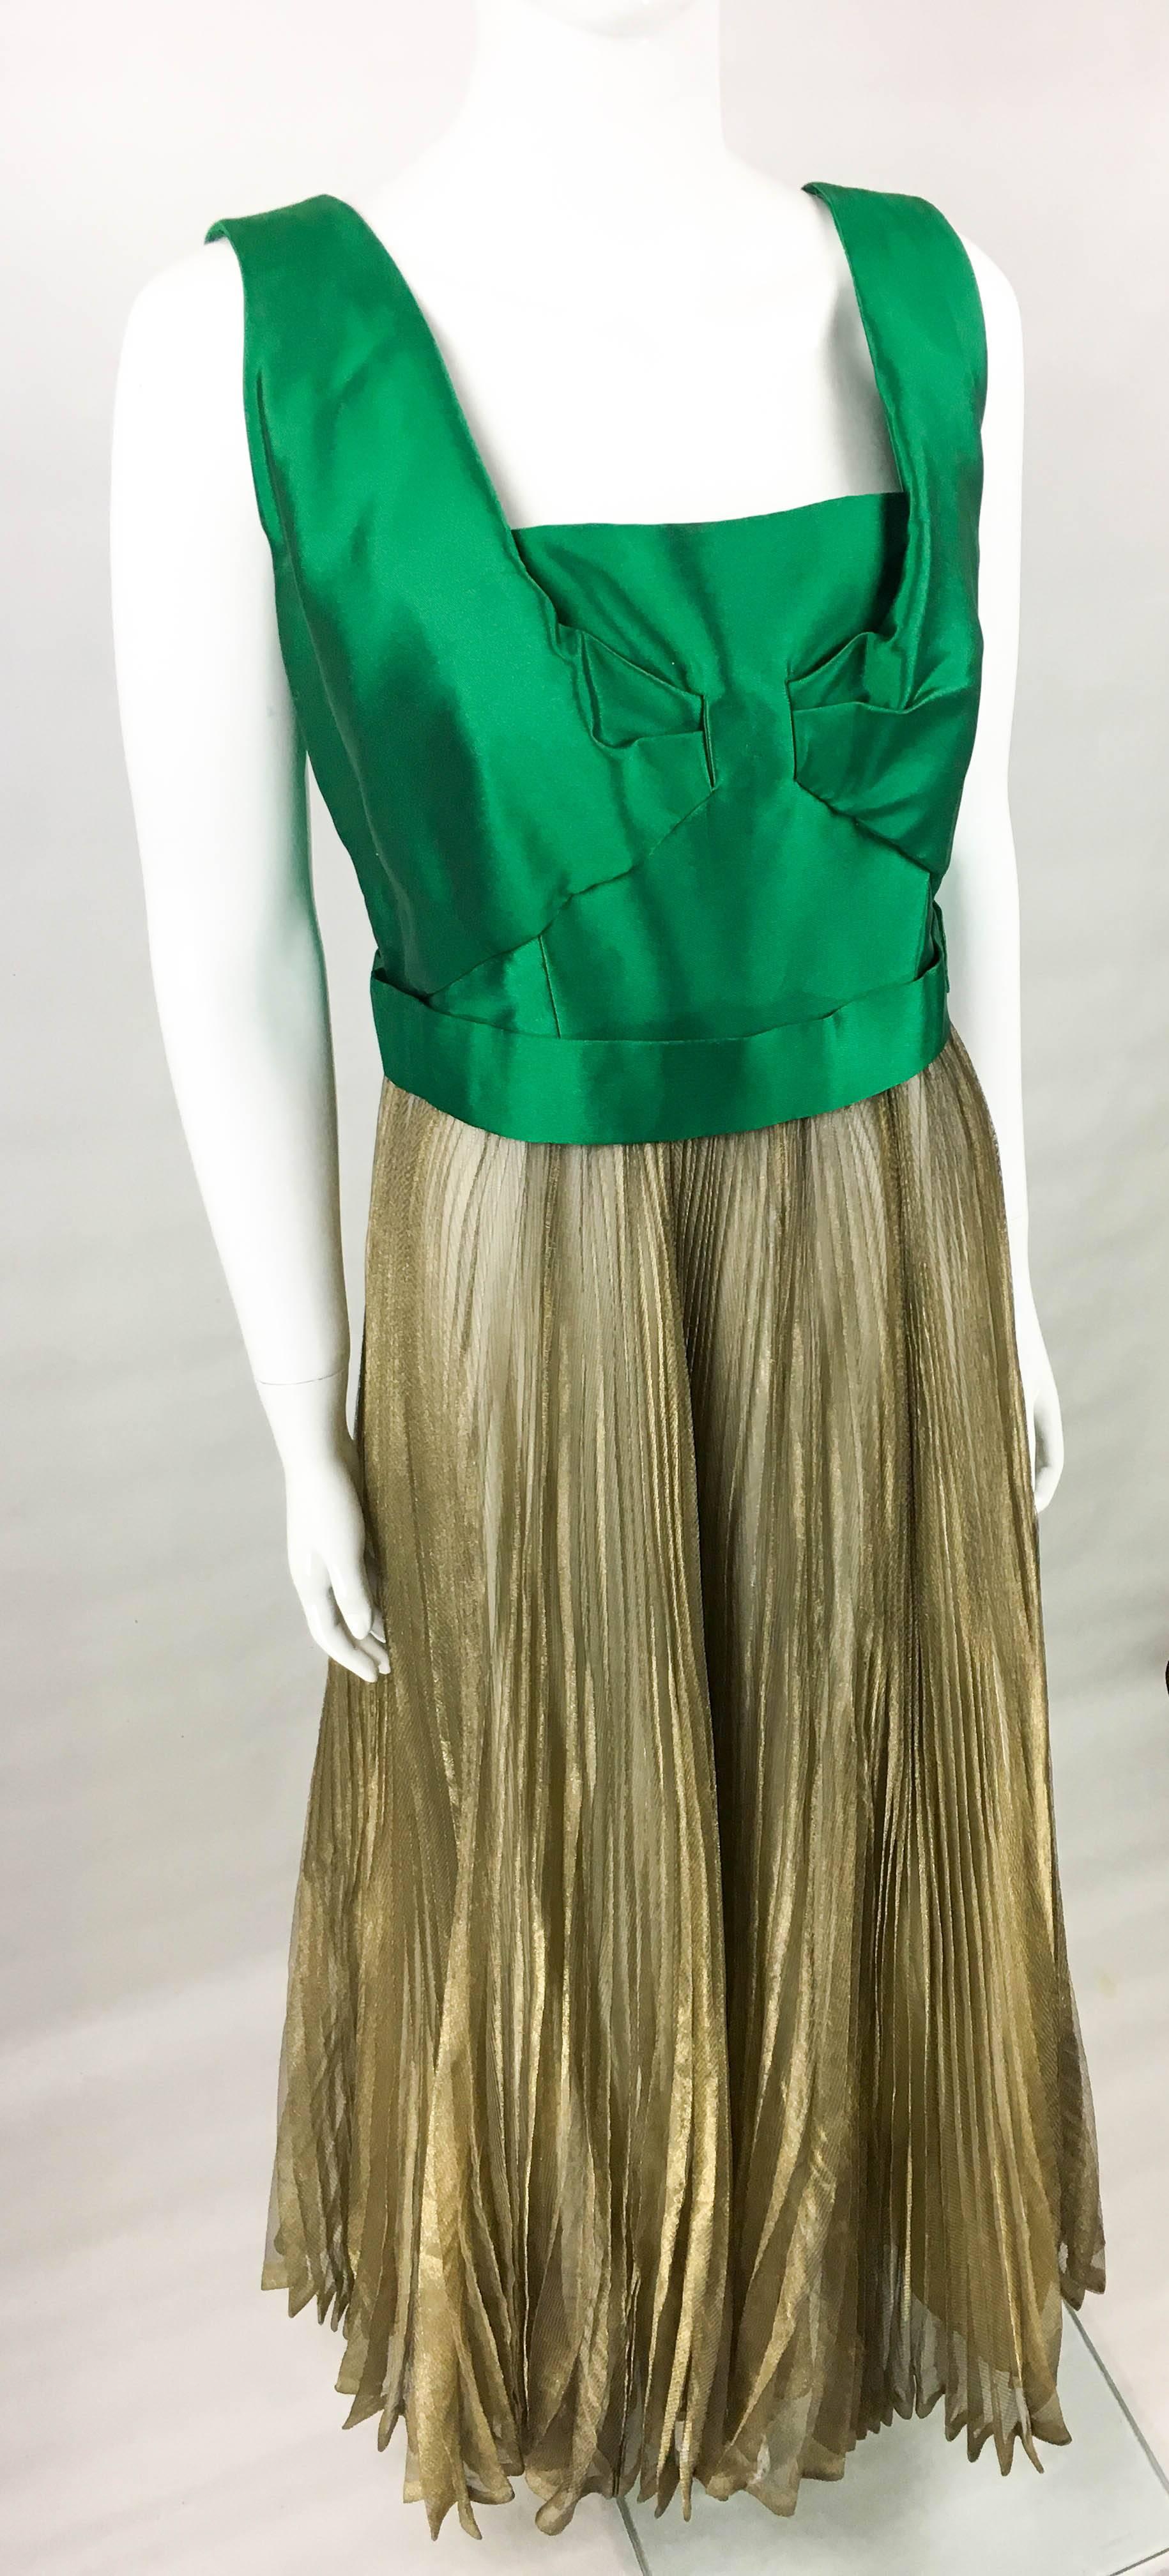 Women's Lanvin Haute Couture Green Gazar and Gold Lame Pleated Gown, early 1960s For Sale